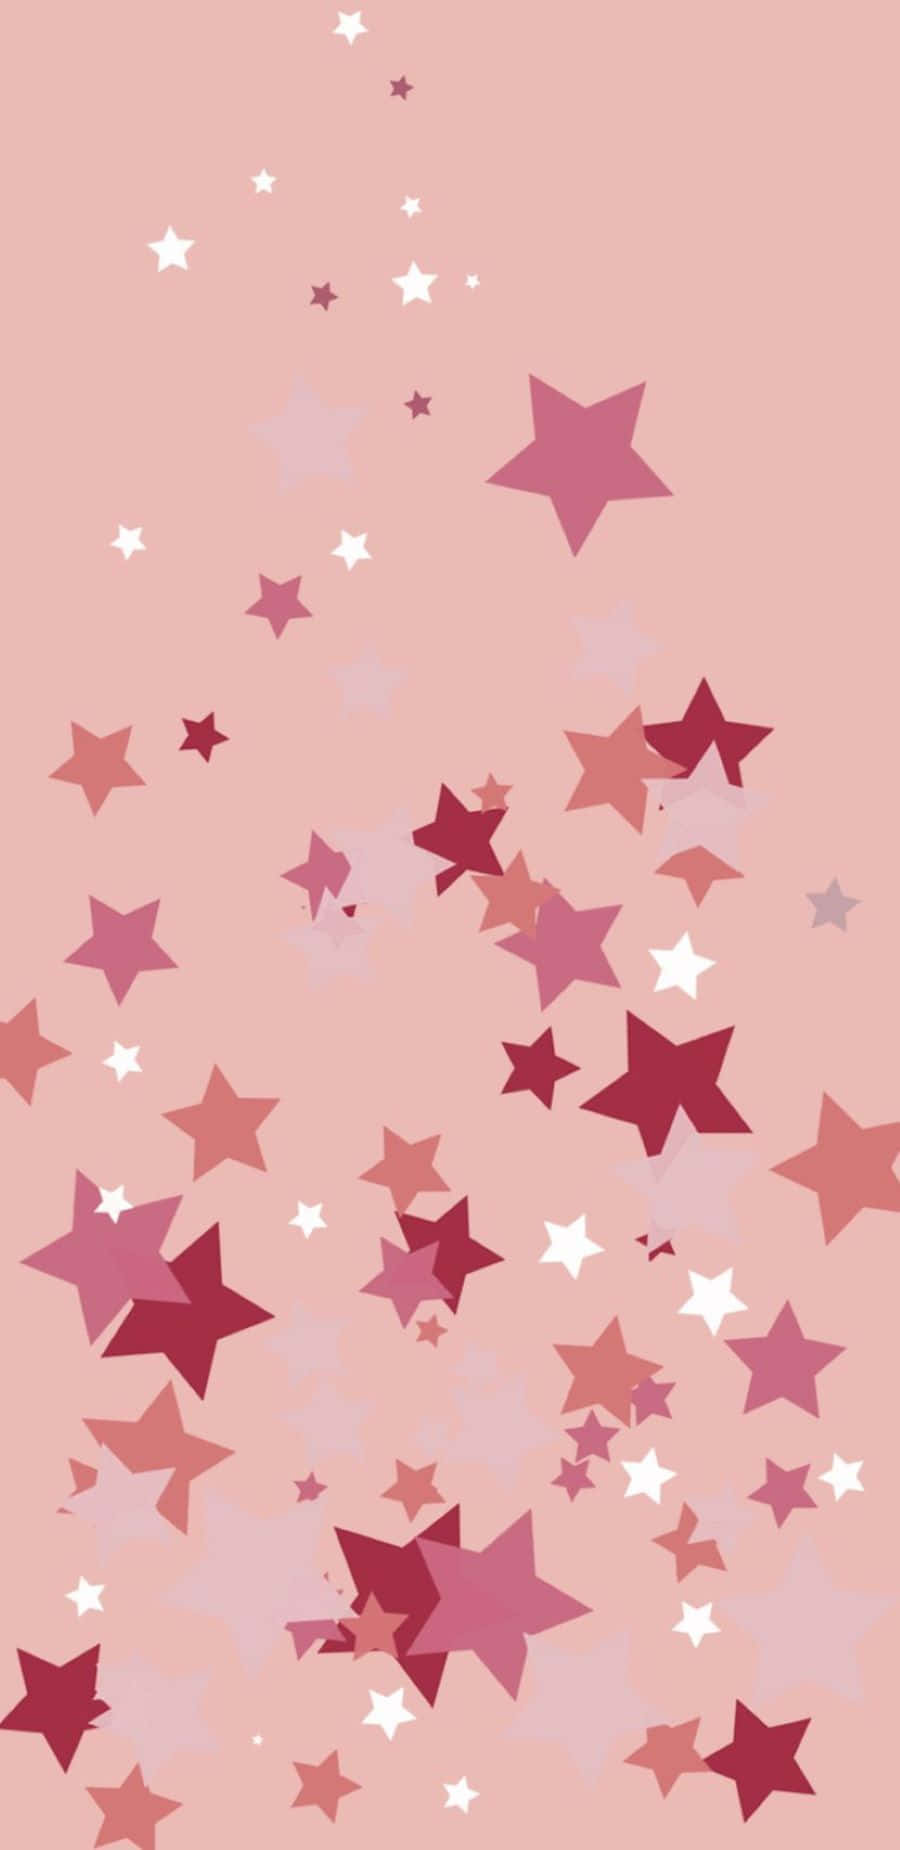 Brighten Up Your Bedroom With This Aesthetic Star Wallpaper!